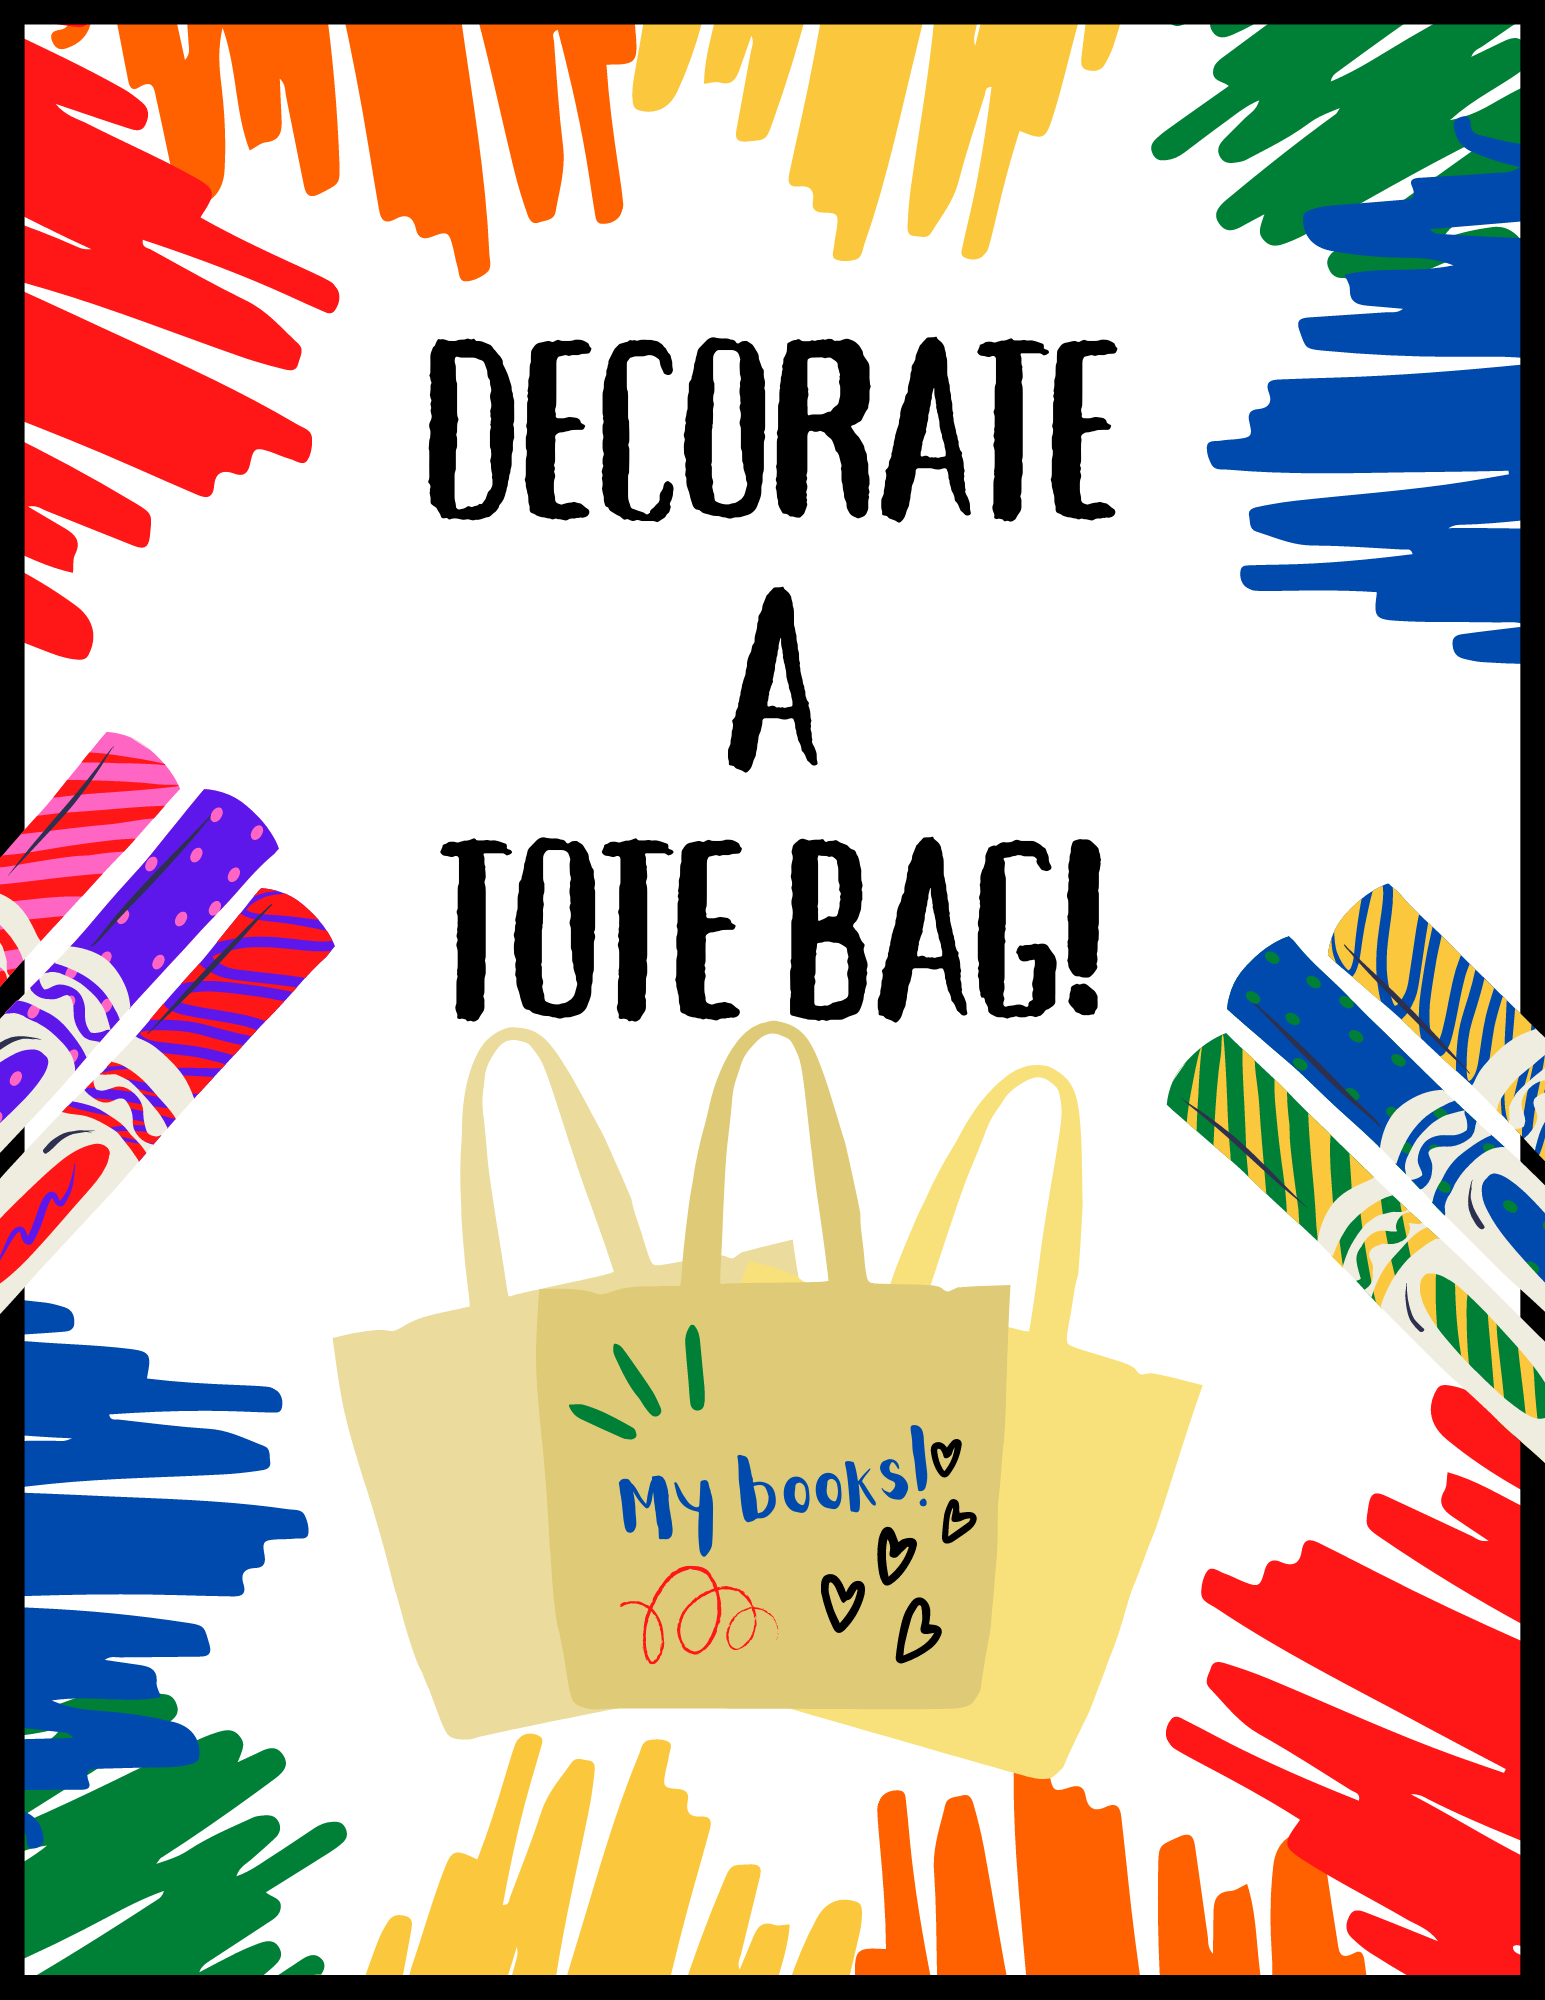 Decorate a tote bag flyer. Contains rainbow colors, markers, and illustrated tote bags.